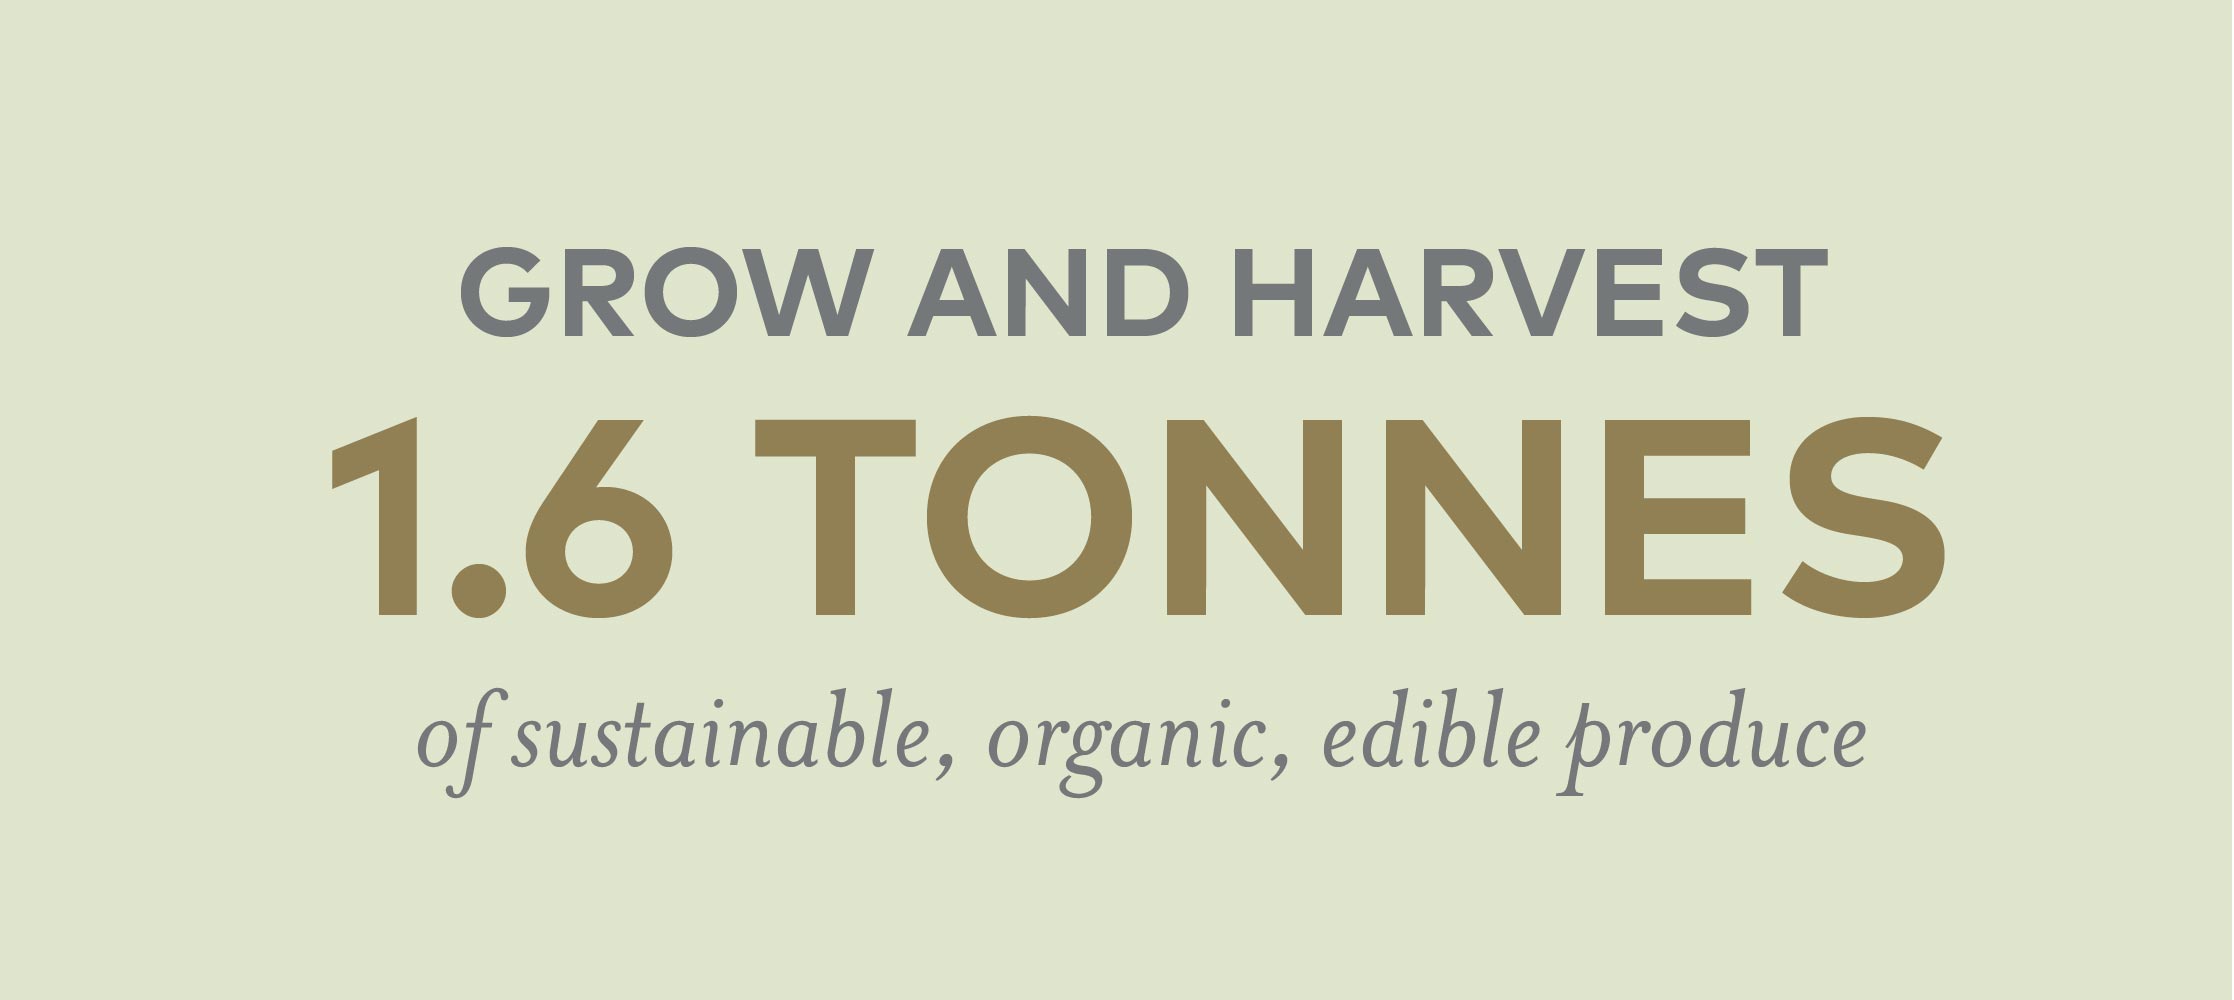 1.6 tonnes of produce grown and harvested